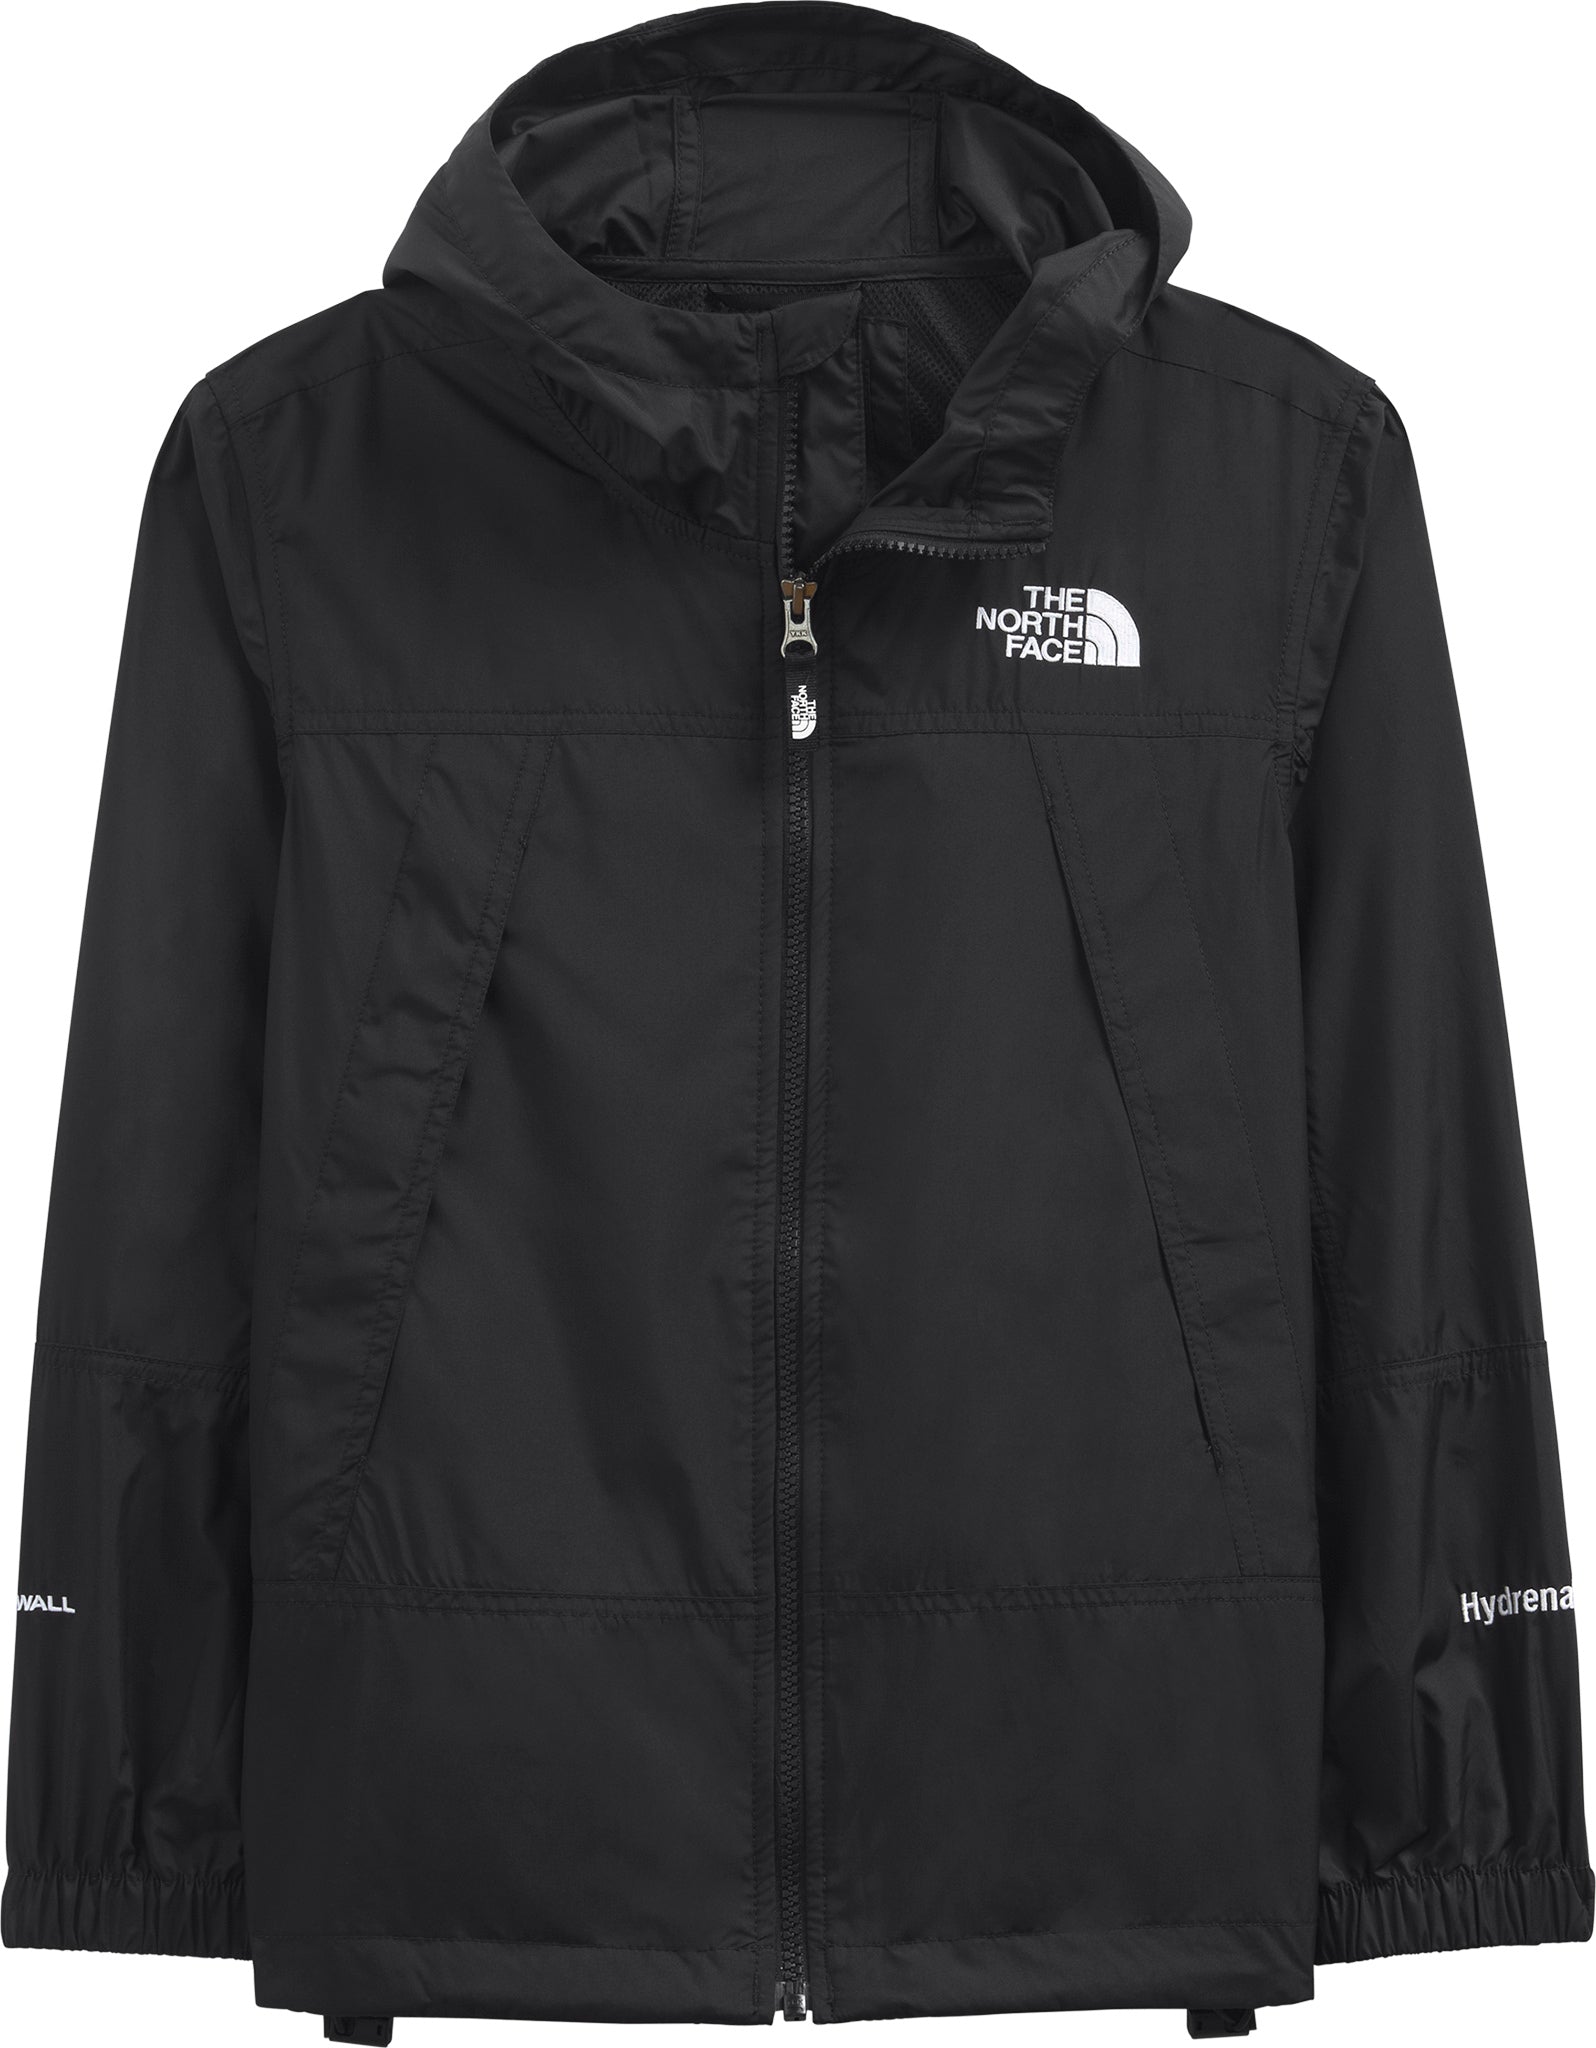 The North Face Hydrenaline™ Wind Jacket - Youth